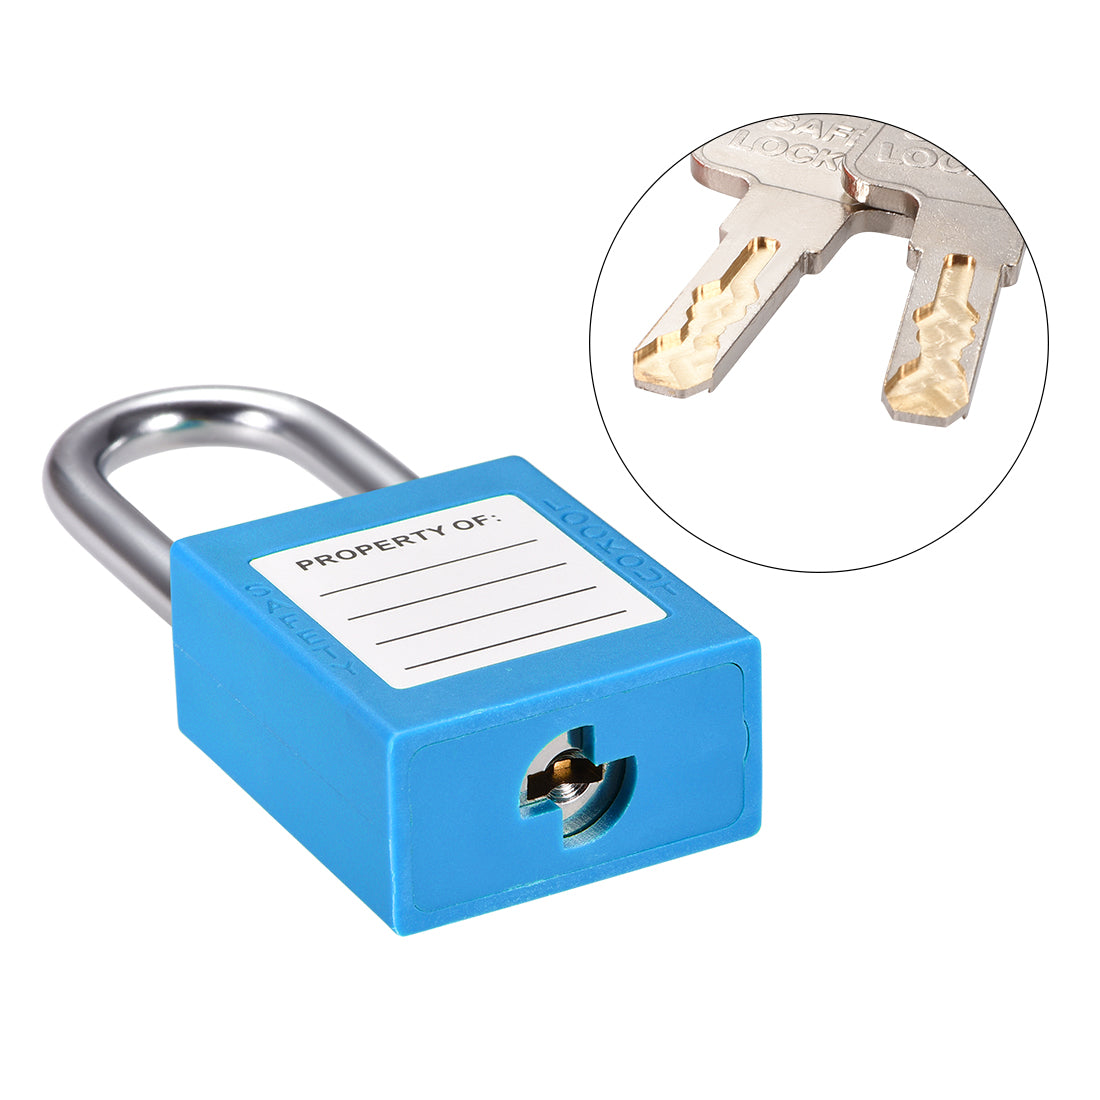 uxcell Uxcell Lockout Tagout Safety Padlock 38mm Steel Shackle Keyed Different Blue 2Pcs